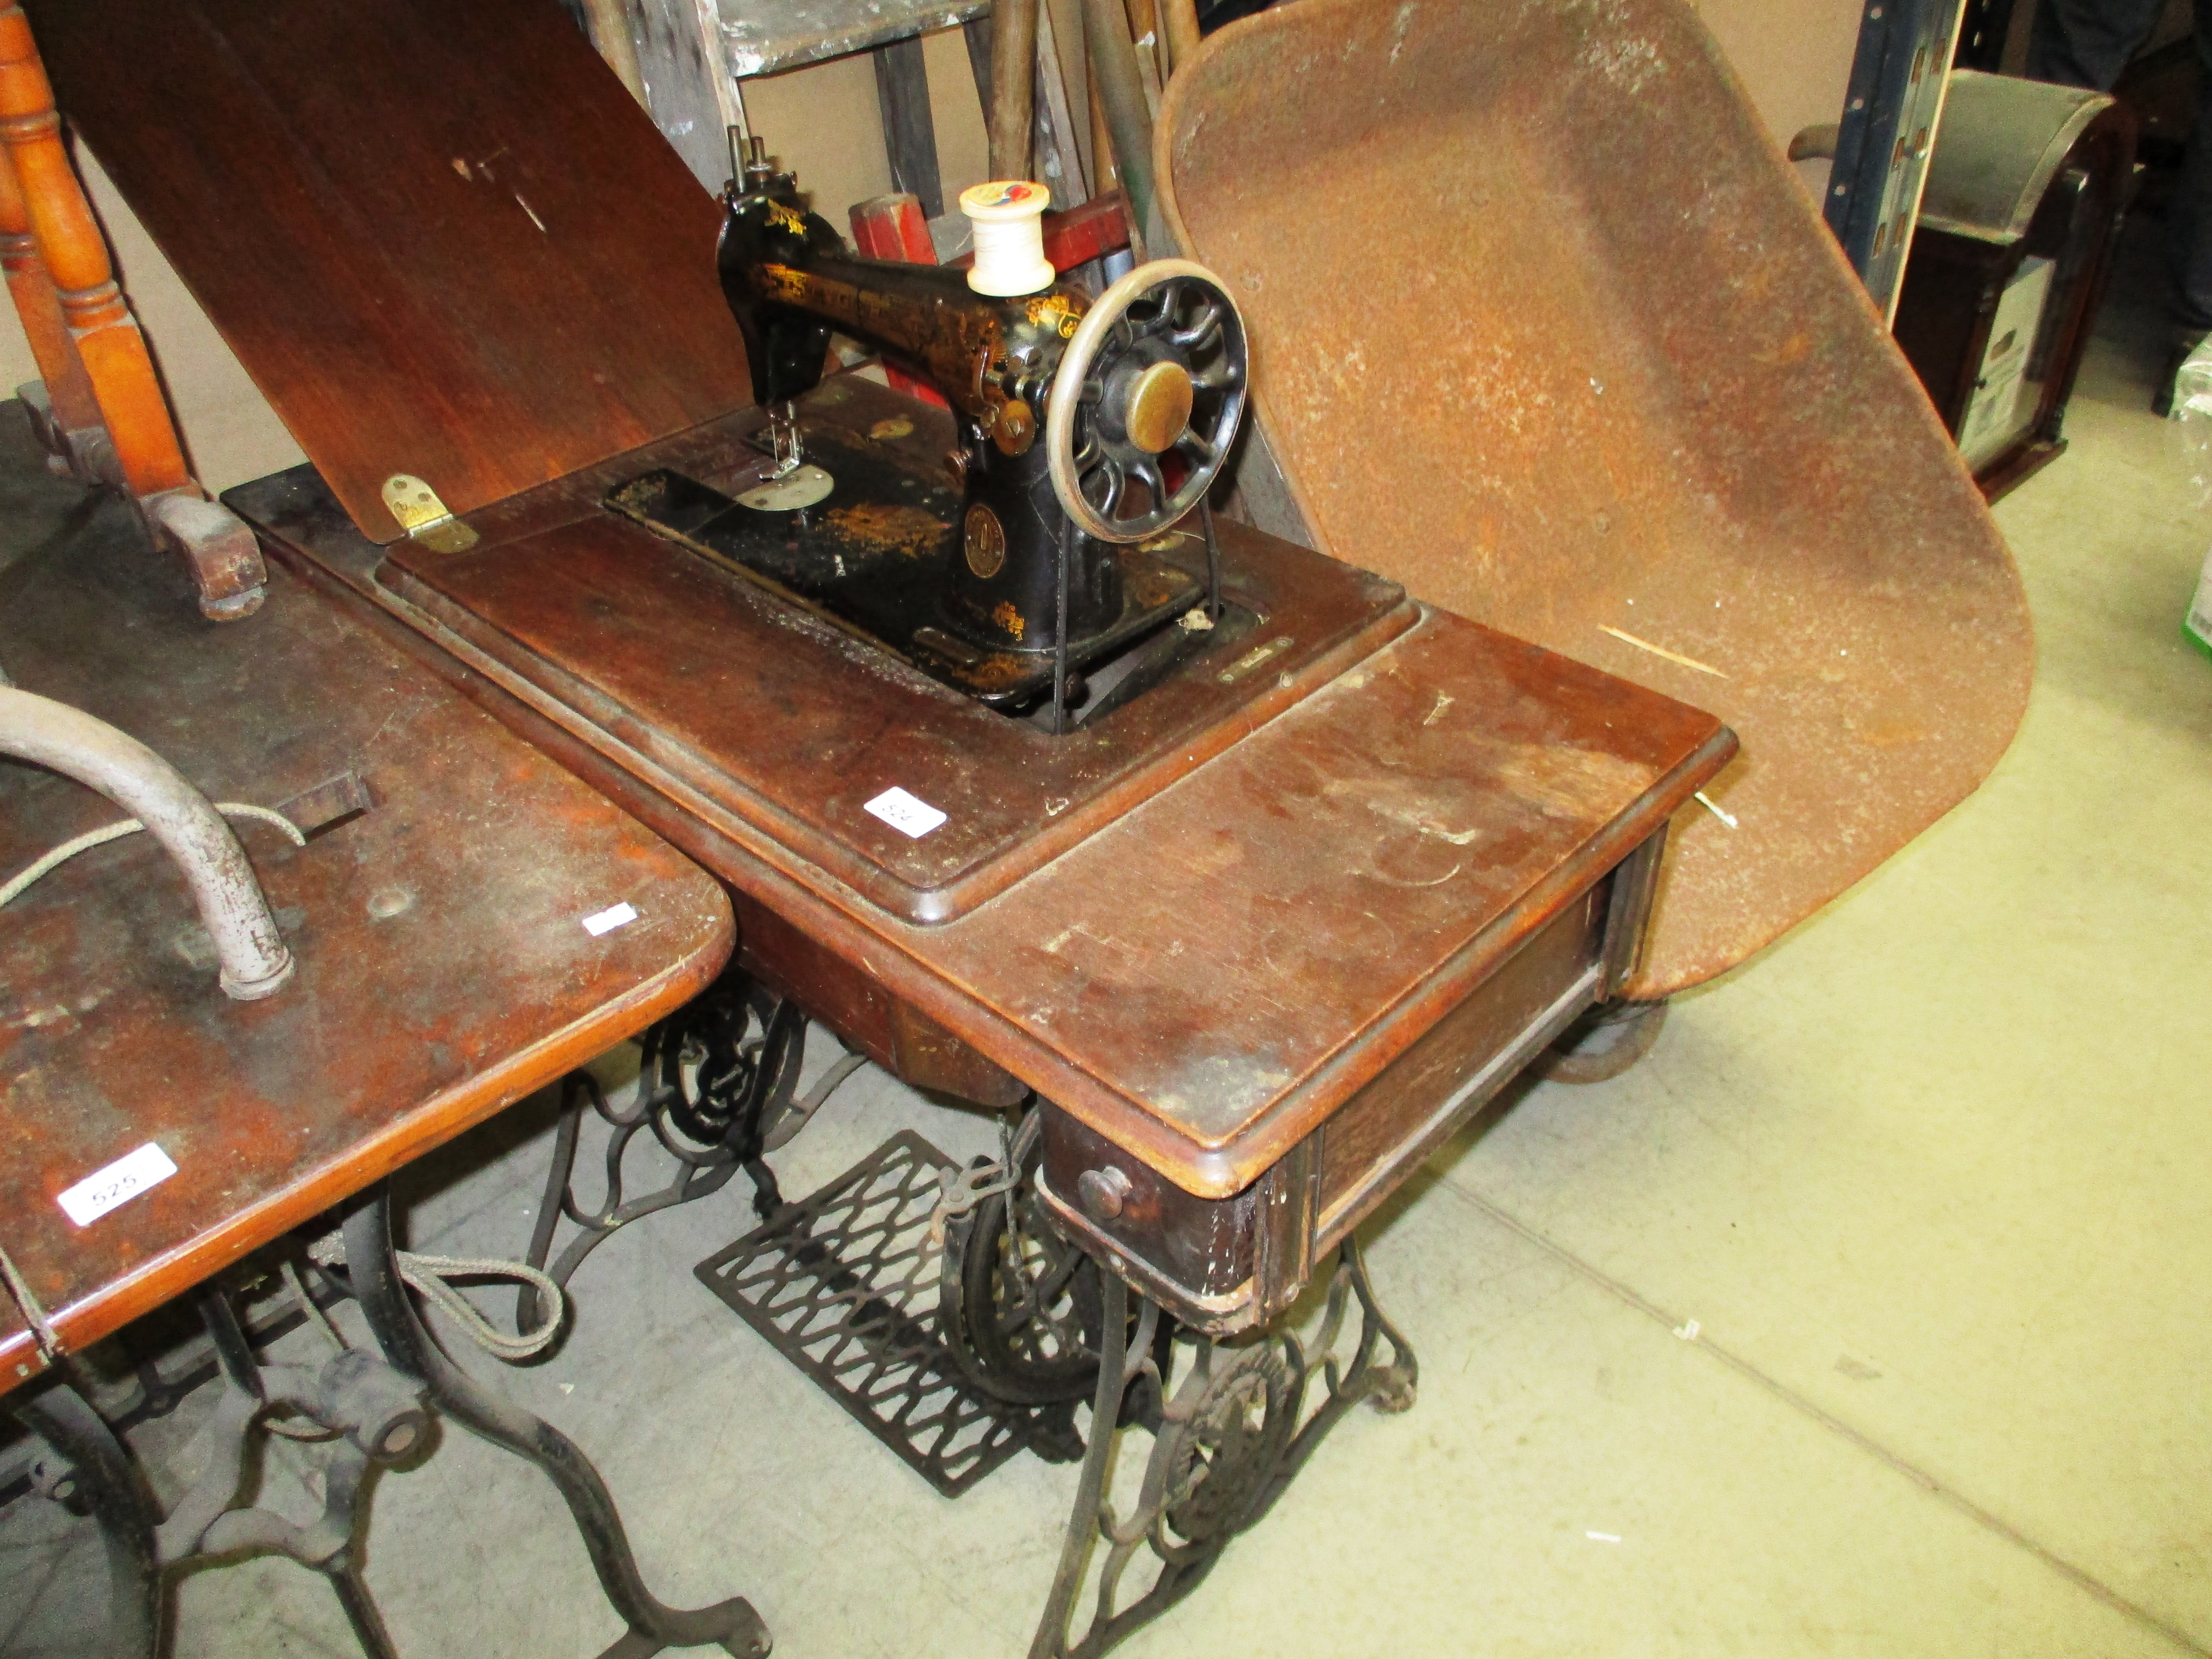 Singer manual sewing machine in wooden case on treadle base